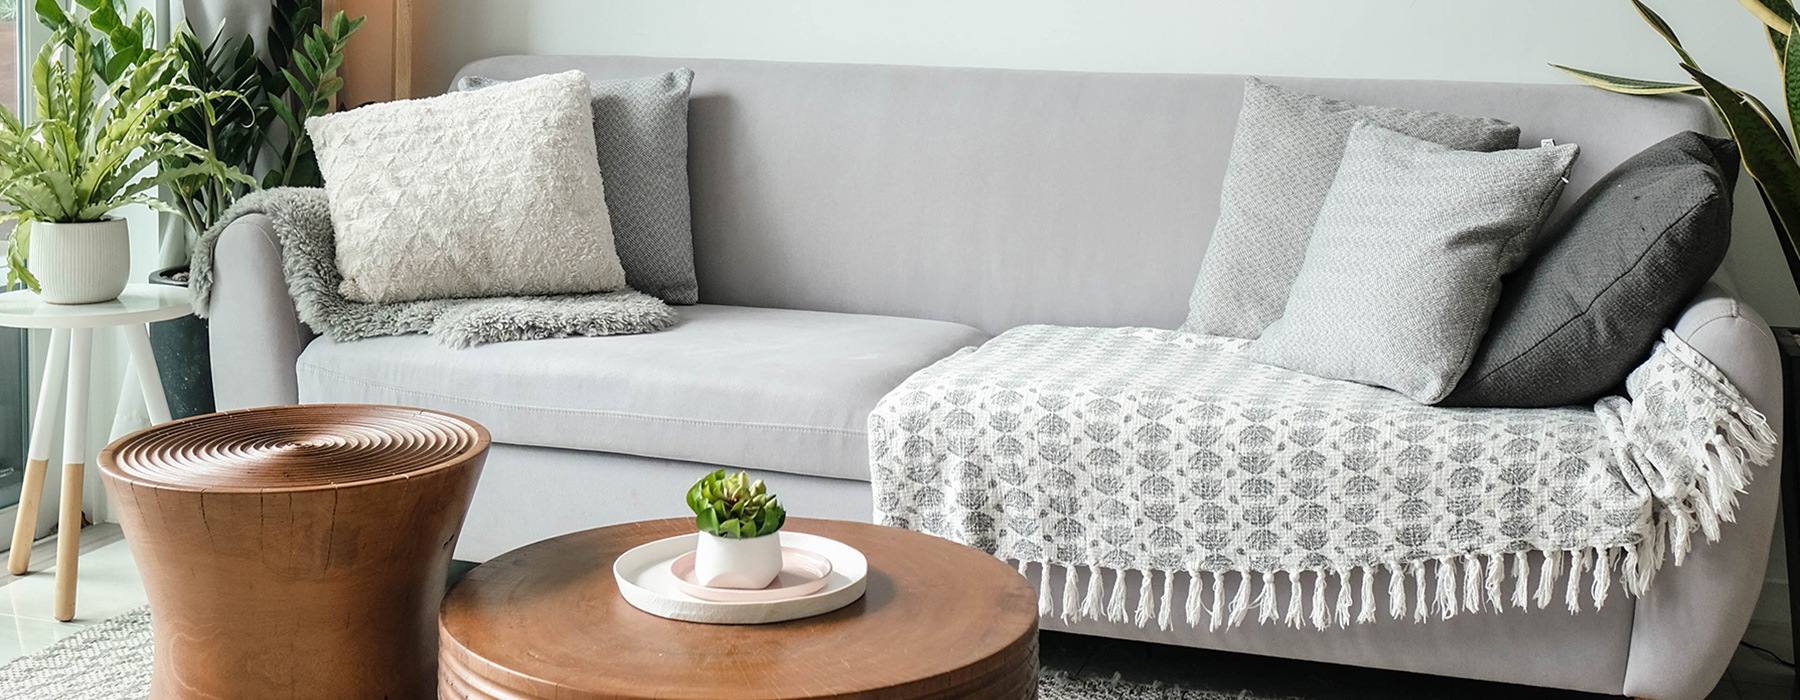 lifestyle image of a grey couch with foliage and modern decor